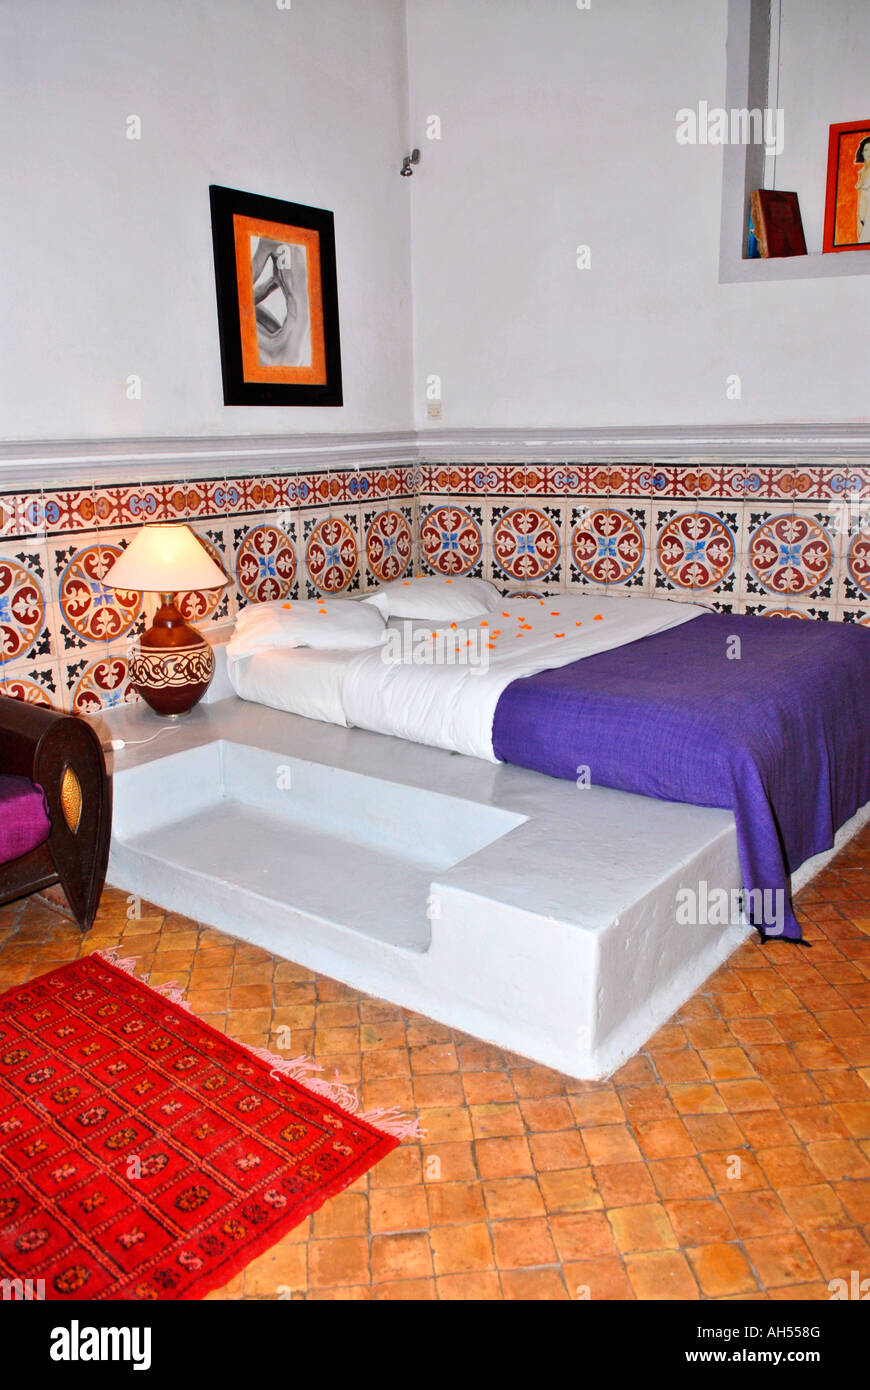 Morocco , Essaouira , Riad El Madina , typical African hippy hotel scene of beige suite with rugs & traditional tiled walls Stock Photo